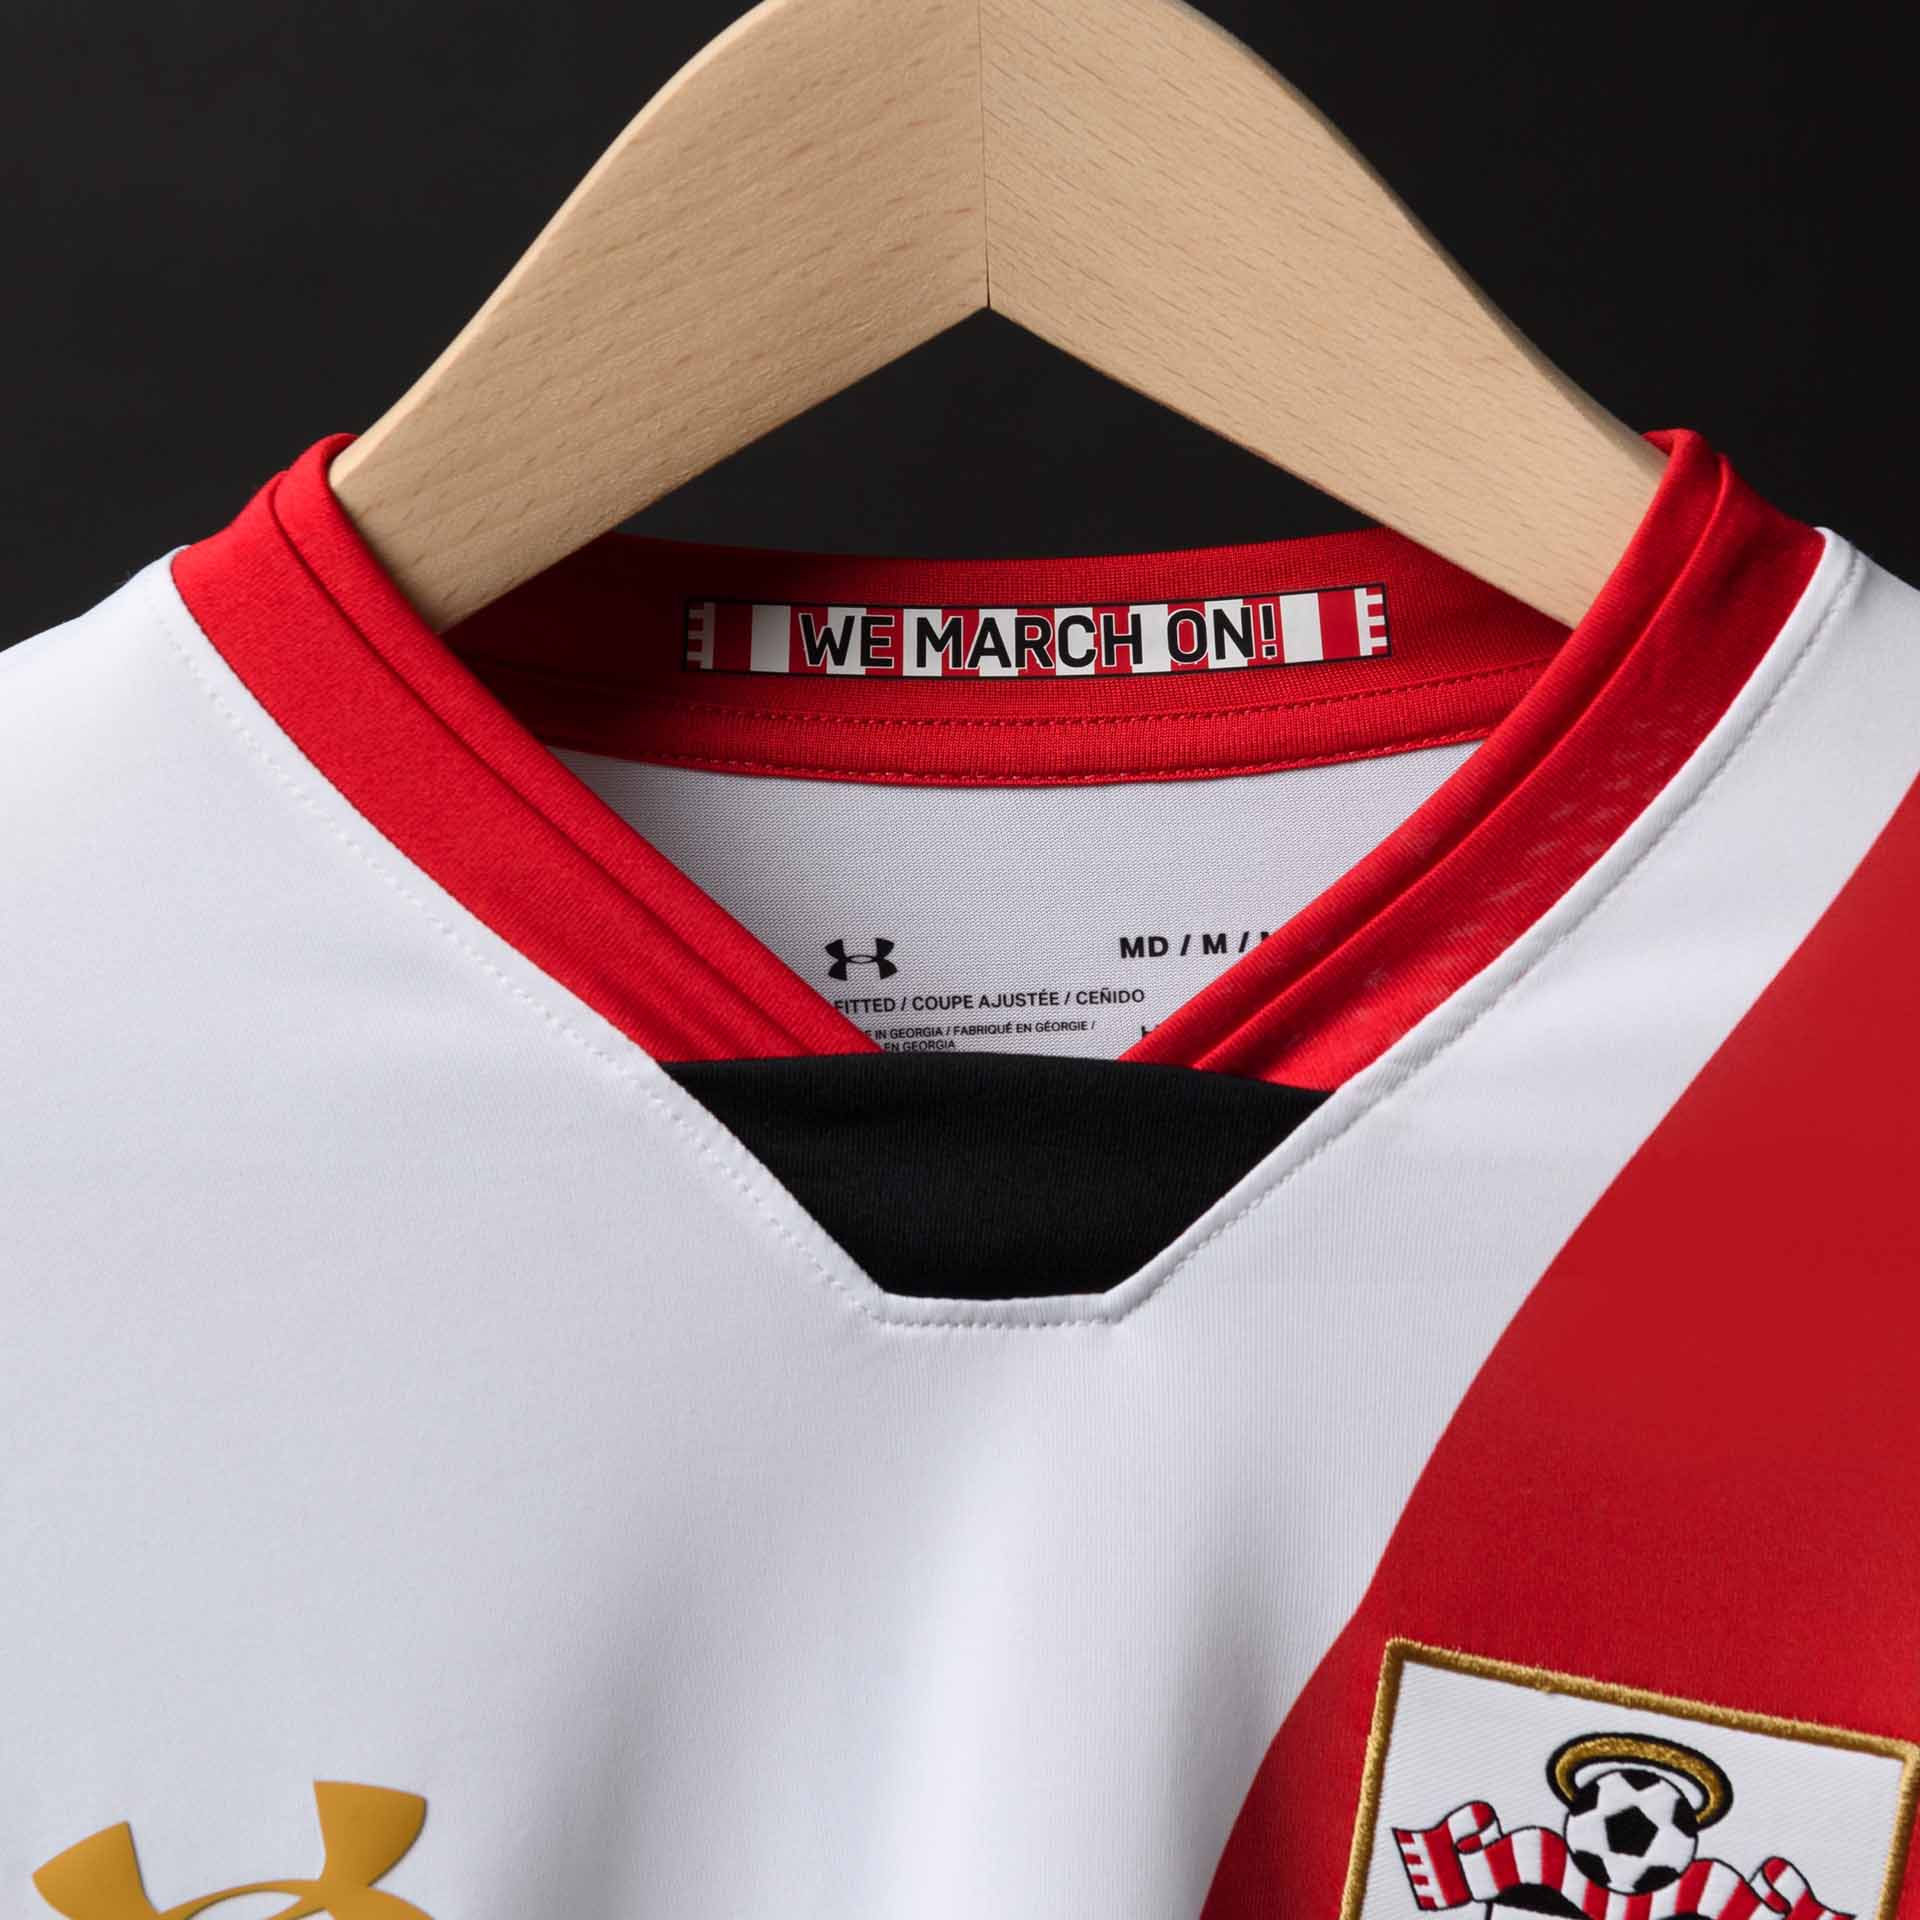 Under Armour Launch Southampton 20/21 Home & Third Shirts - SoccerBible